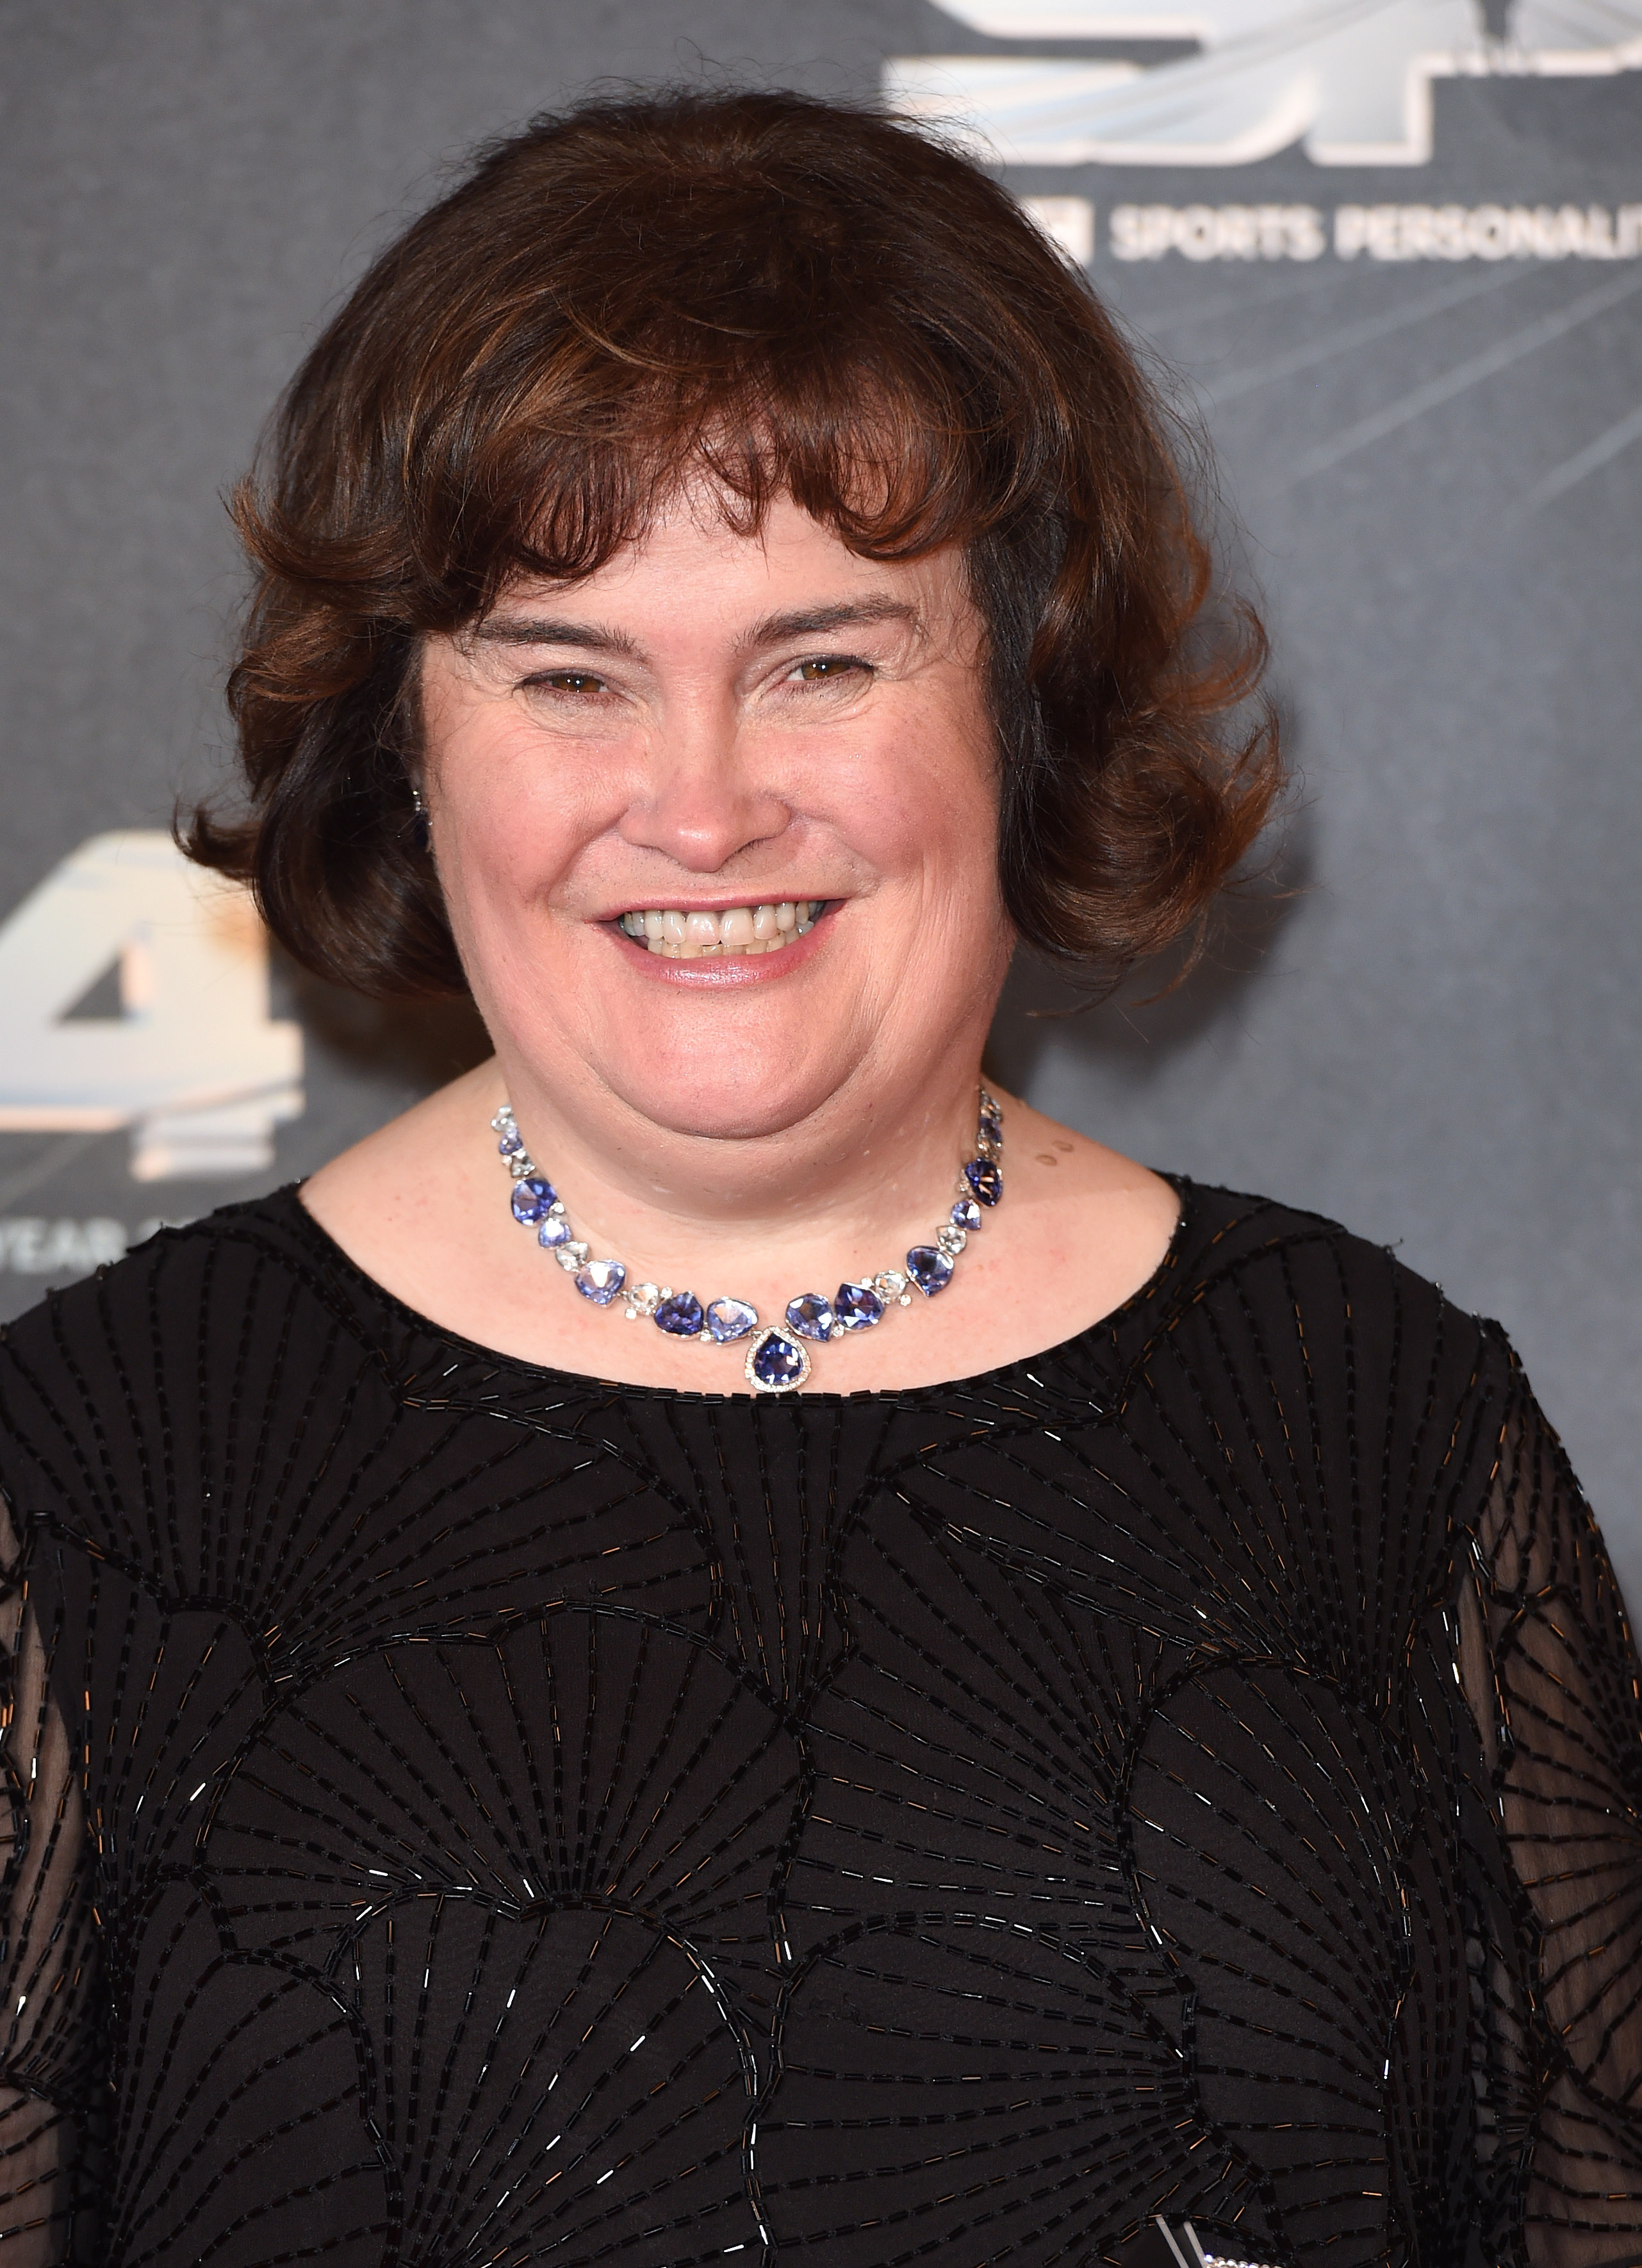 Susan Boyle attends the BBC Sports Personality of the Year awards on December 14, 2014 in Glasgow, Scotland | Source: Getty Images